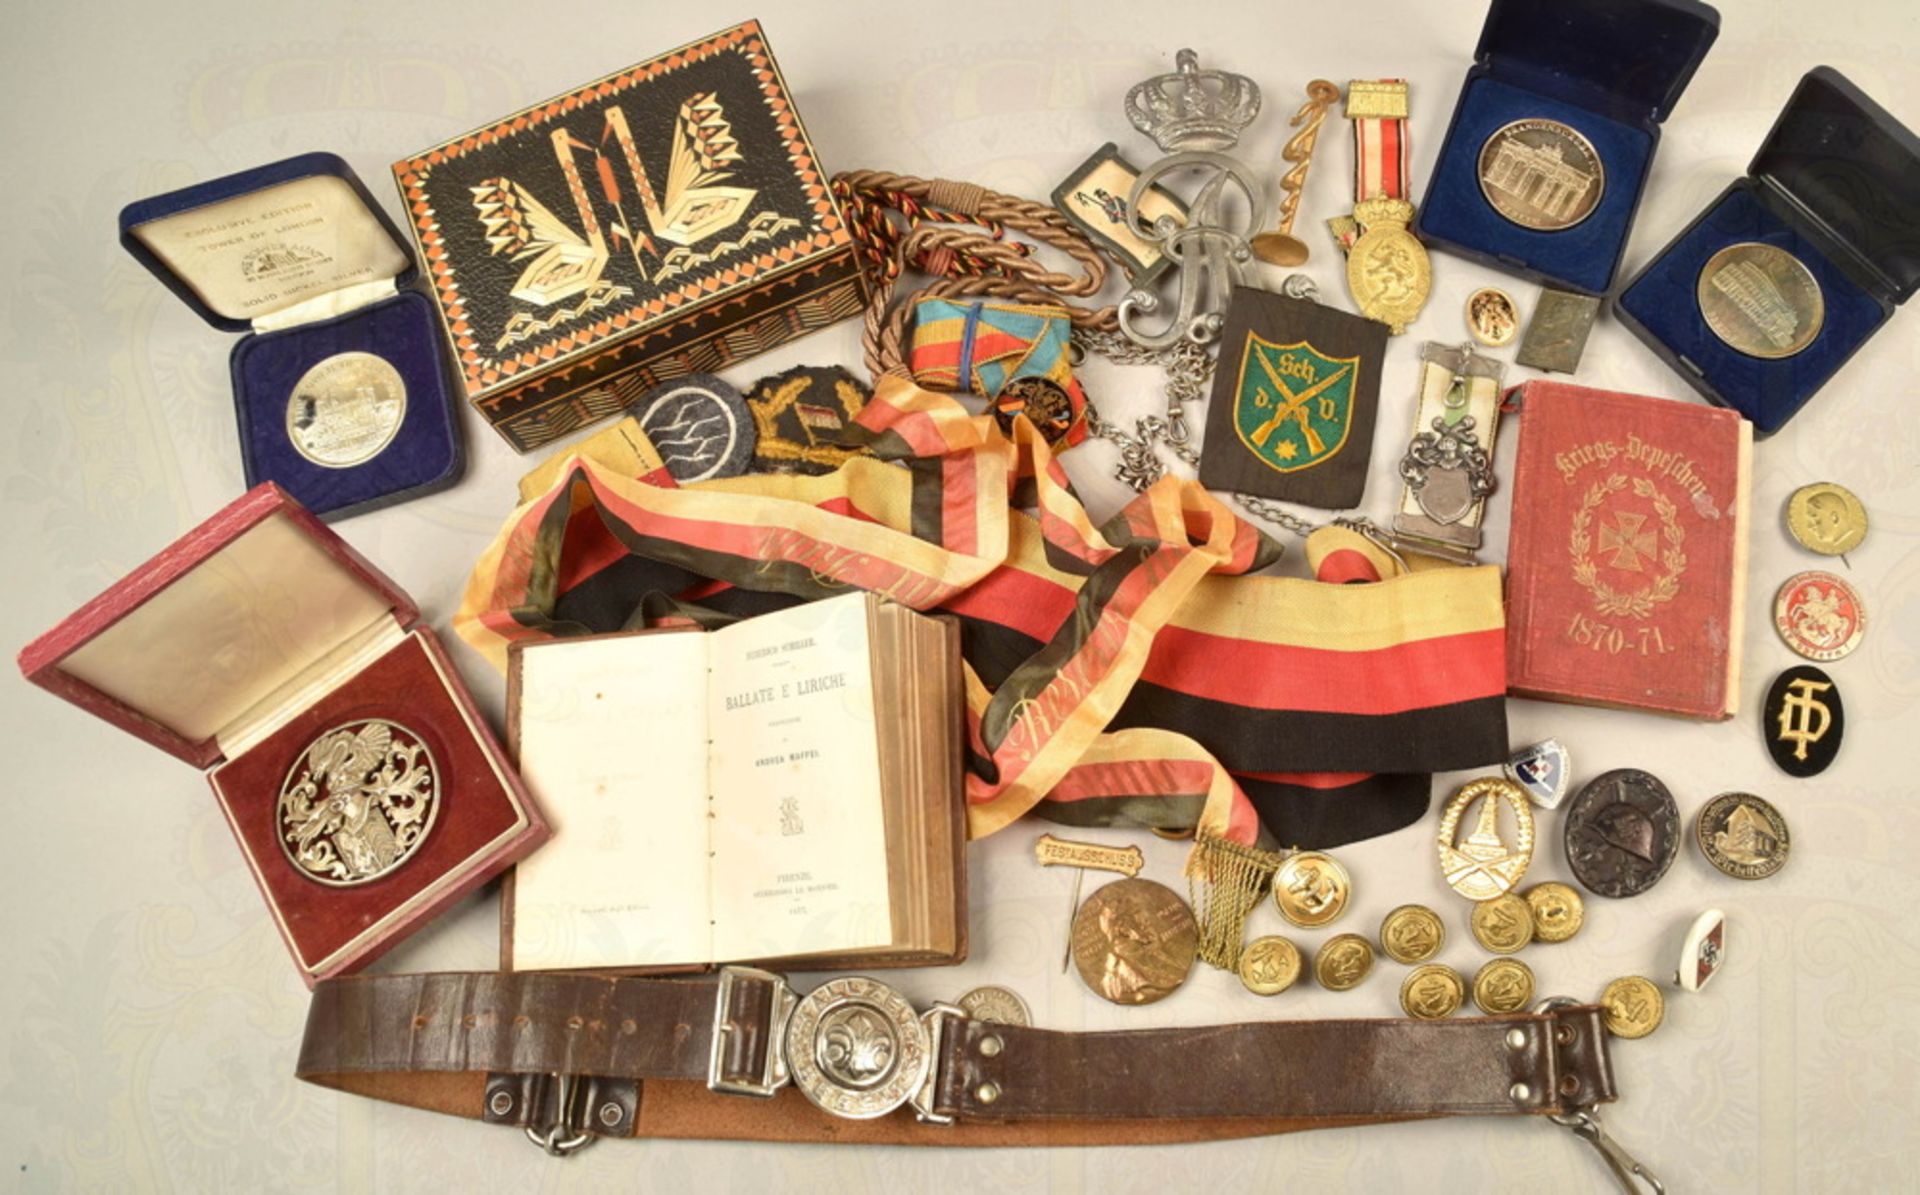 Collection of German awards, badges and Student memorabilia - Image 2 of 2